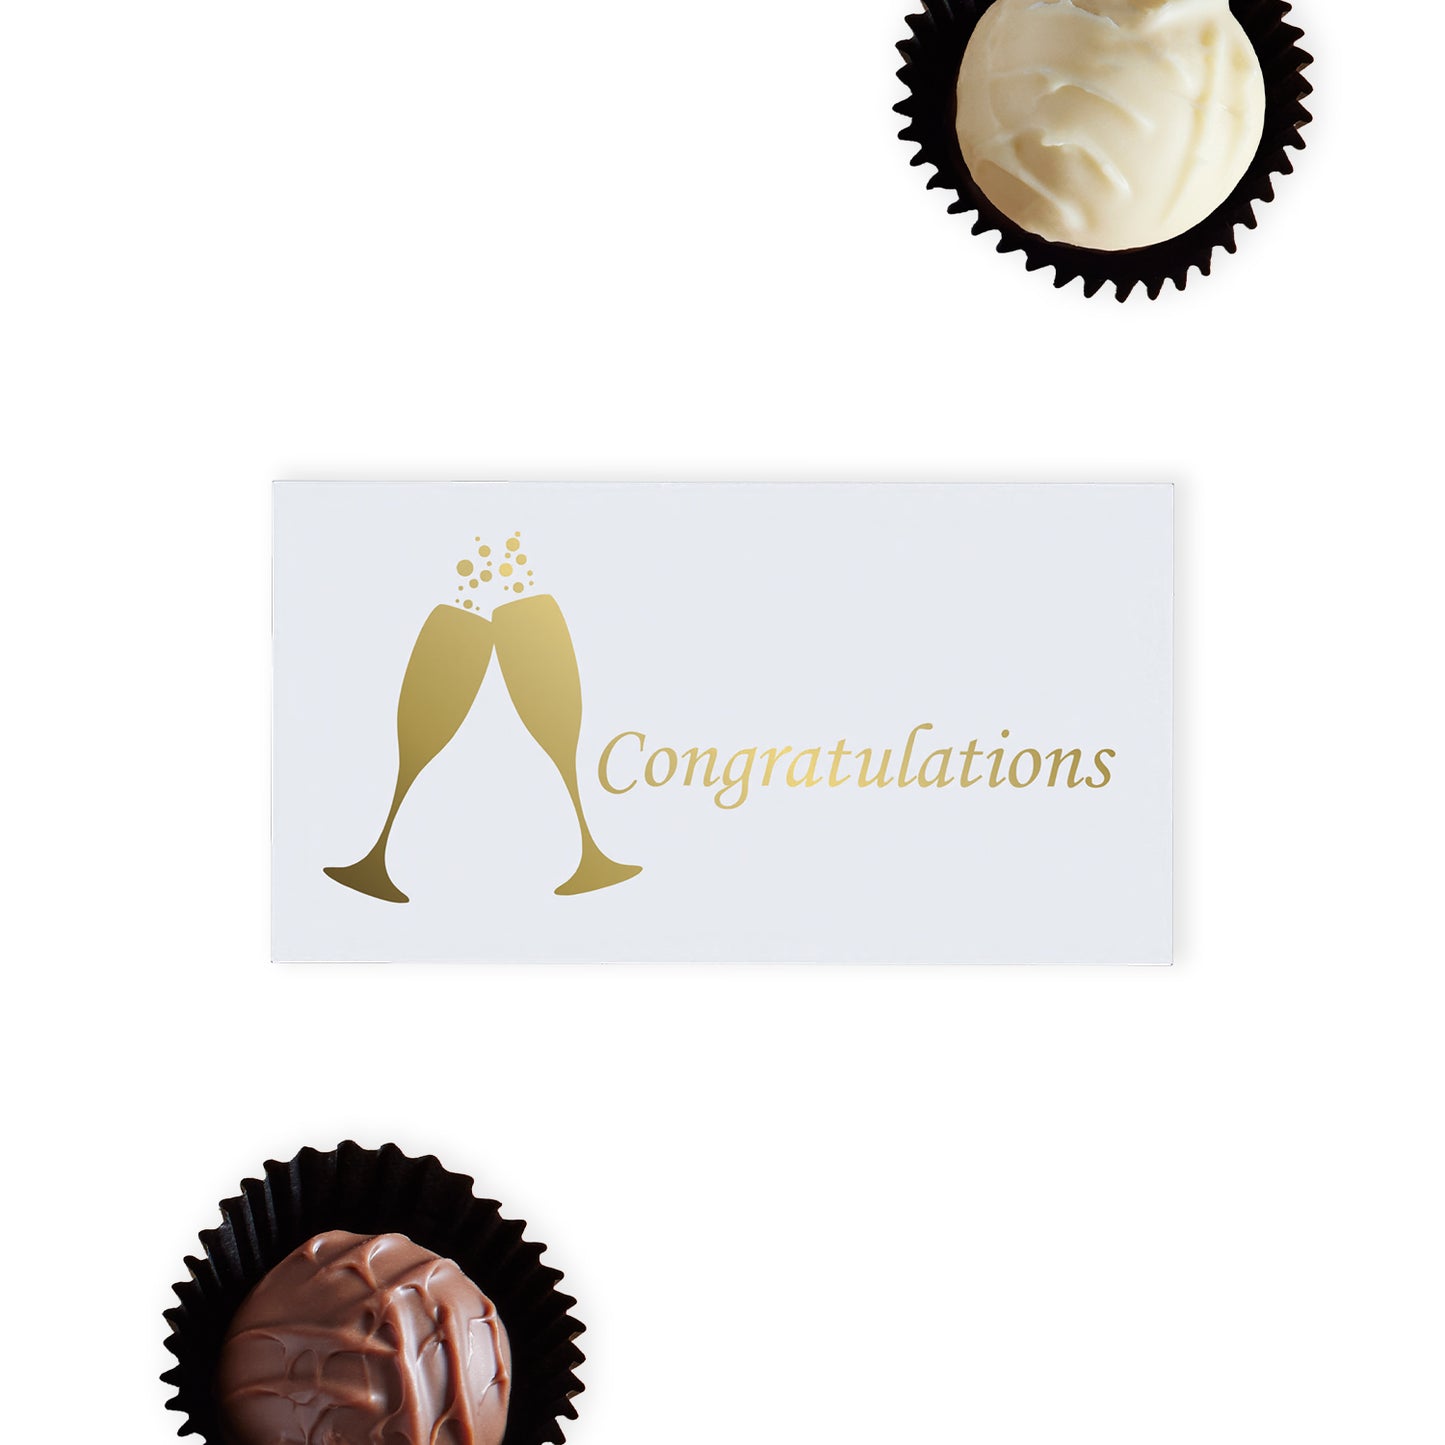 "Congratulations" Chocolate Gift Box, designed to mark every achievement with a touch of Luxury. This elegant white Luxury box features gold foil-printed champagne glasses and the word "Congratulations," making it a sophisticated choice for any congratulatory occasion. Inside, recipients will find two exquisite hand-finished truffles, one in rich milk chocolate and the other in creamy white chocolate